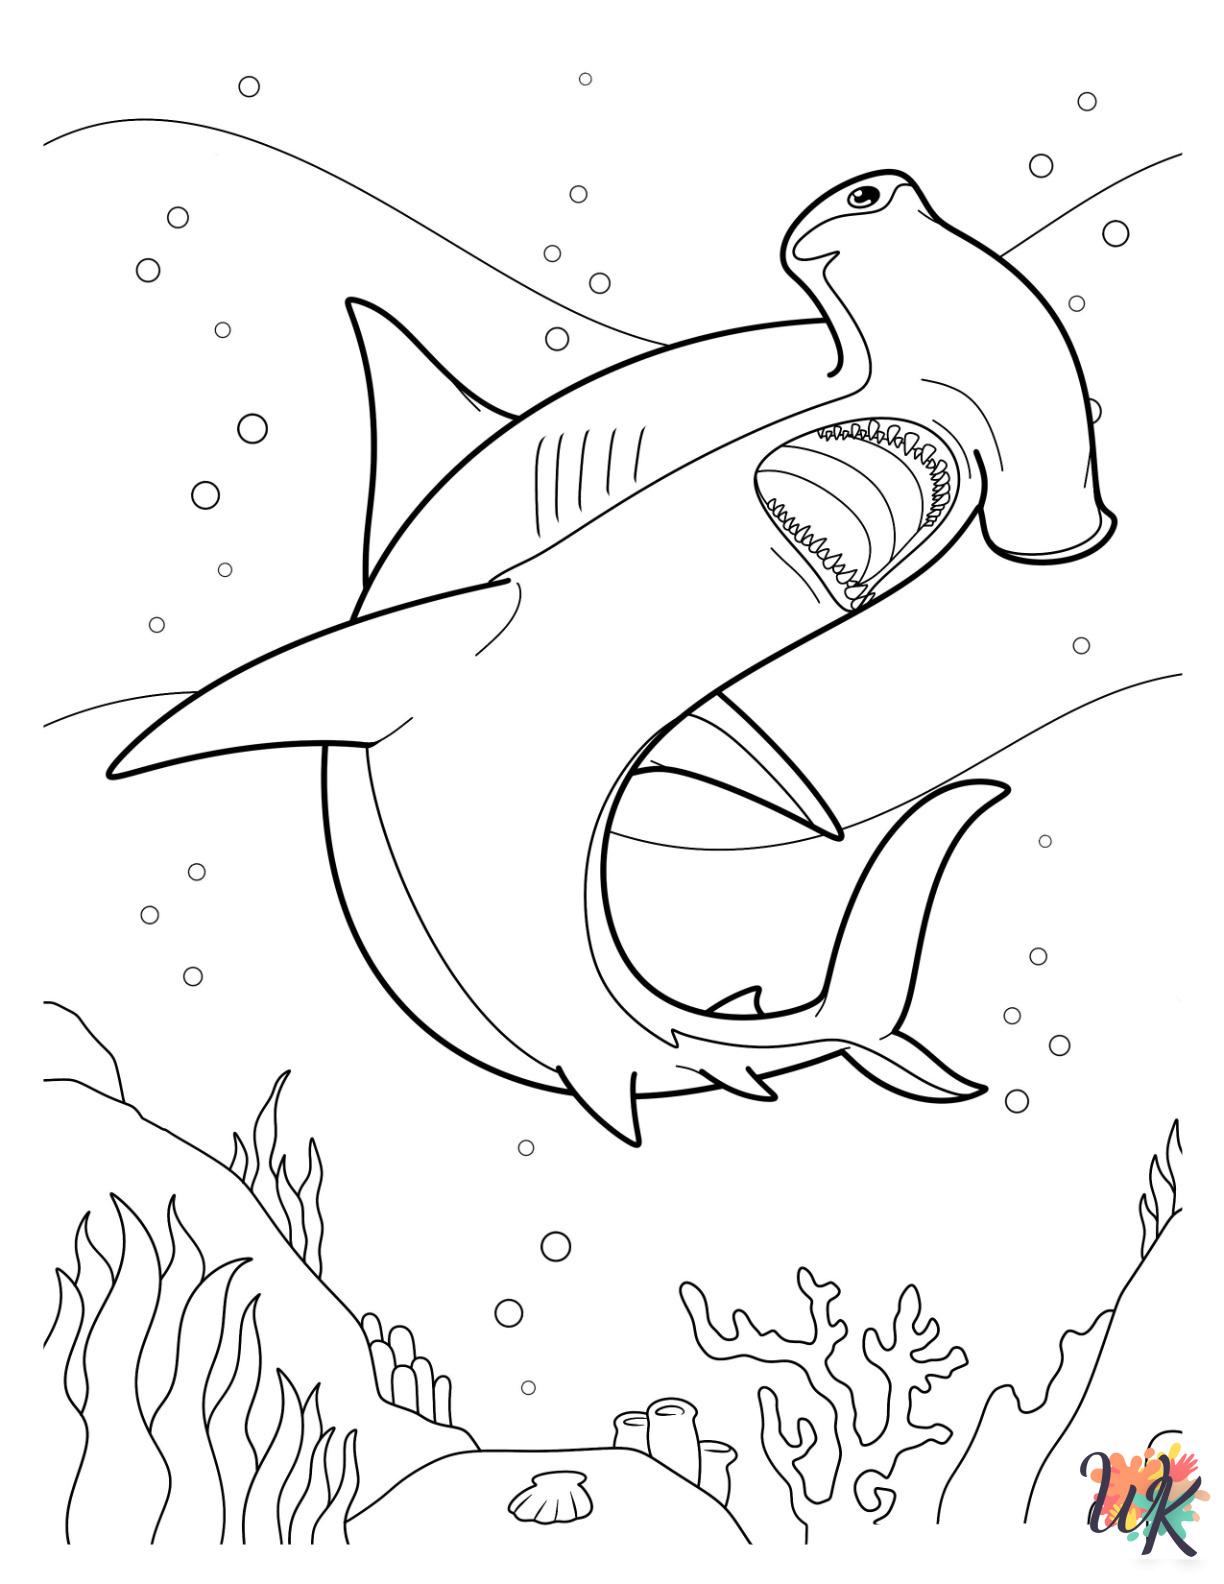 Hammerhead Shark coloring pages for kids 1